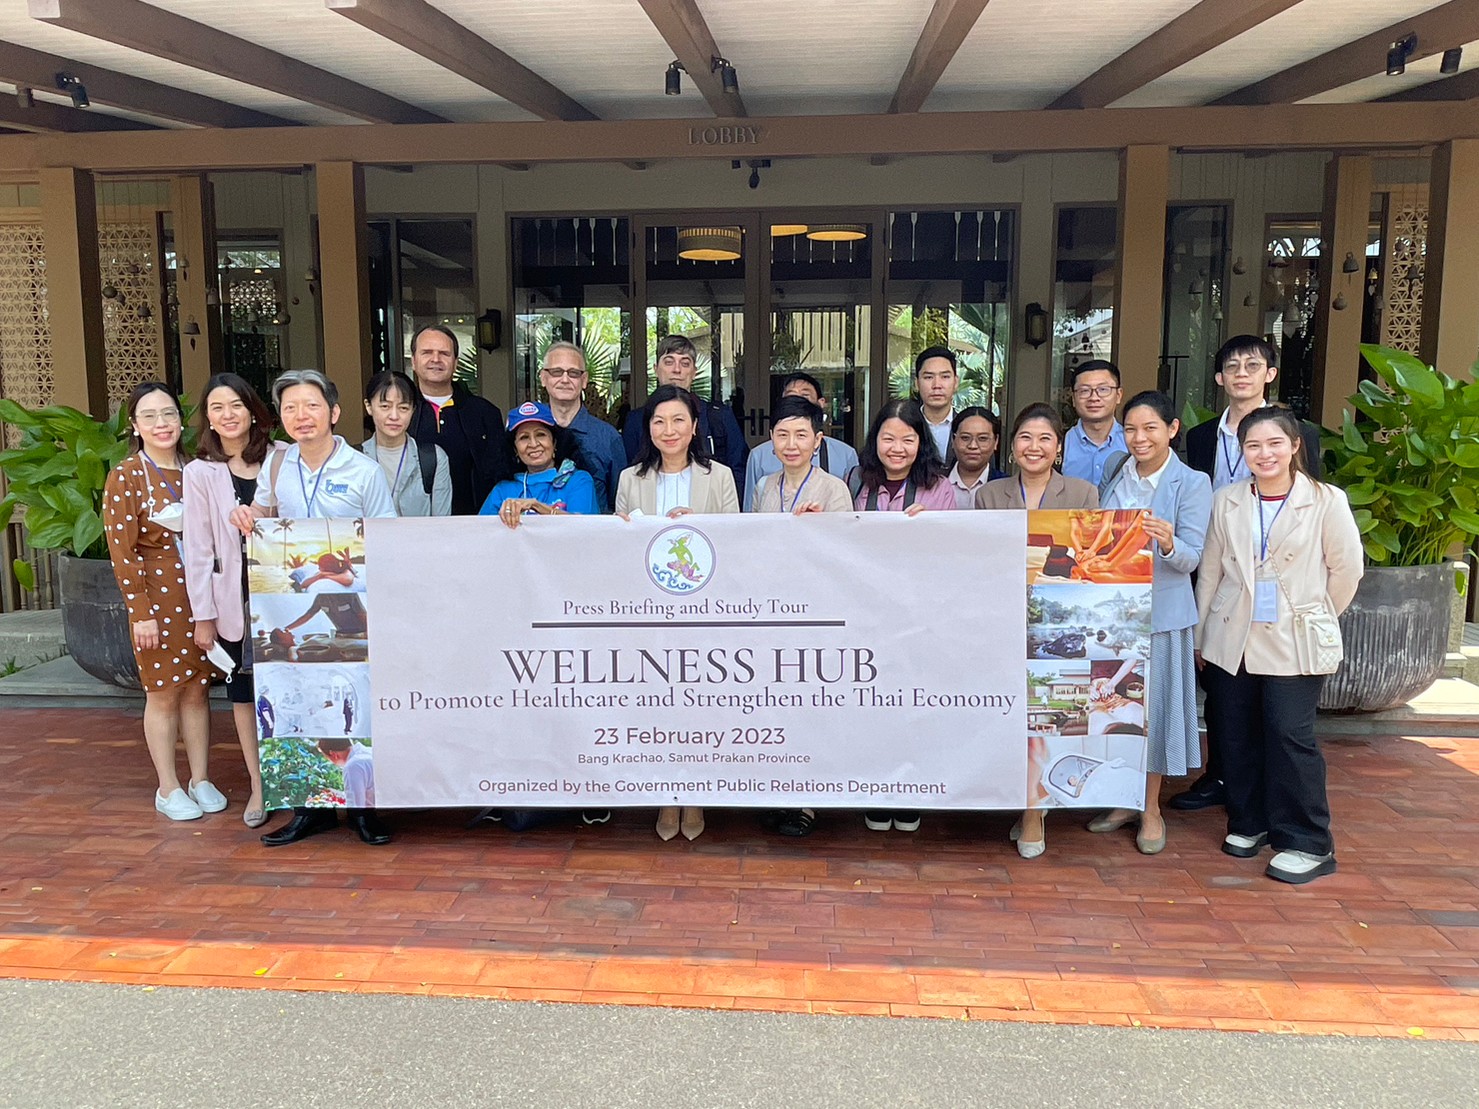 Press Briefing and Study Tour on “Wellness Hub to Promote Healthcare and Strengthen the Thai Economy”